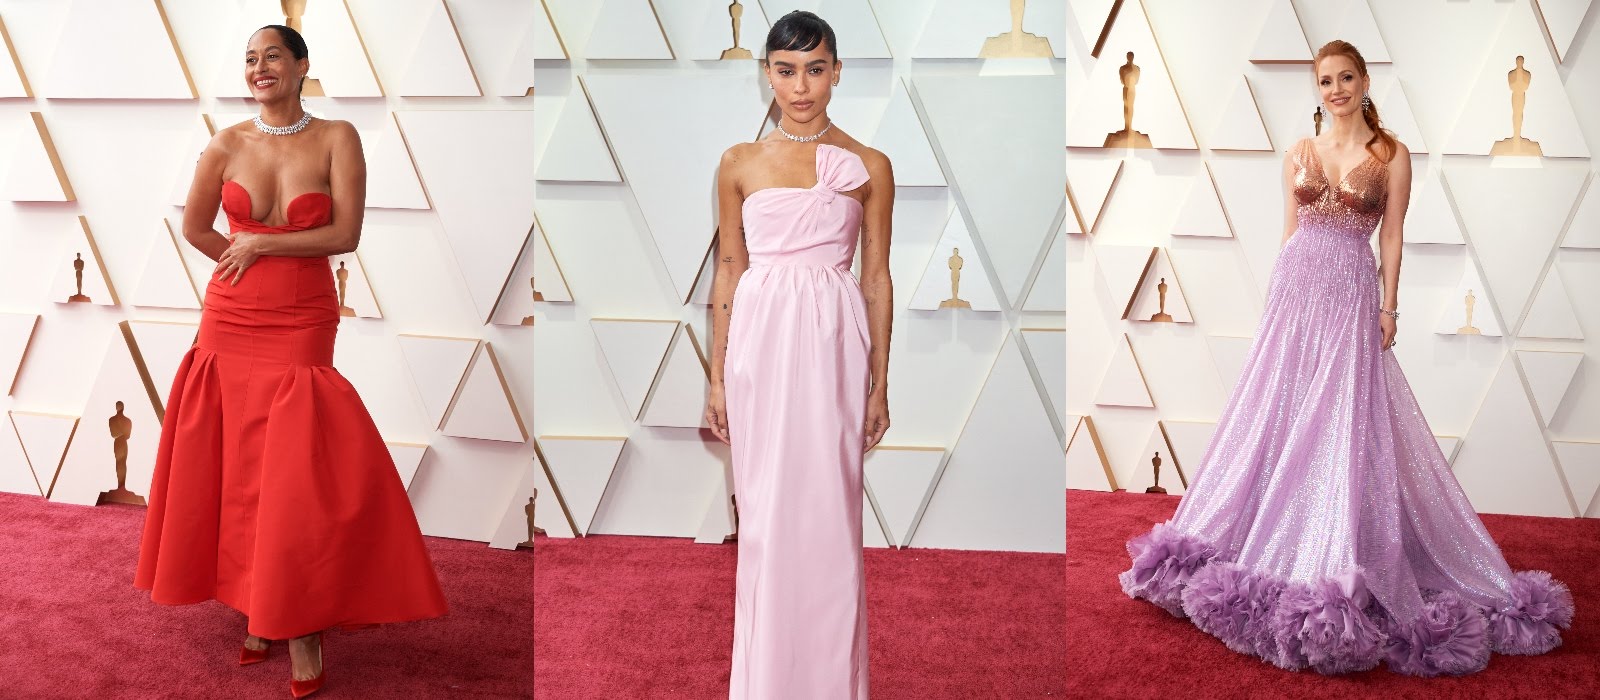 The best dressed at last year’s Oscars